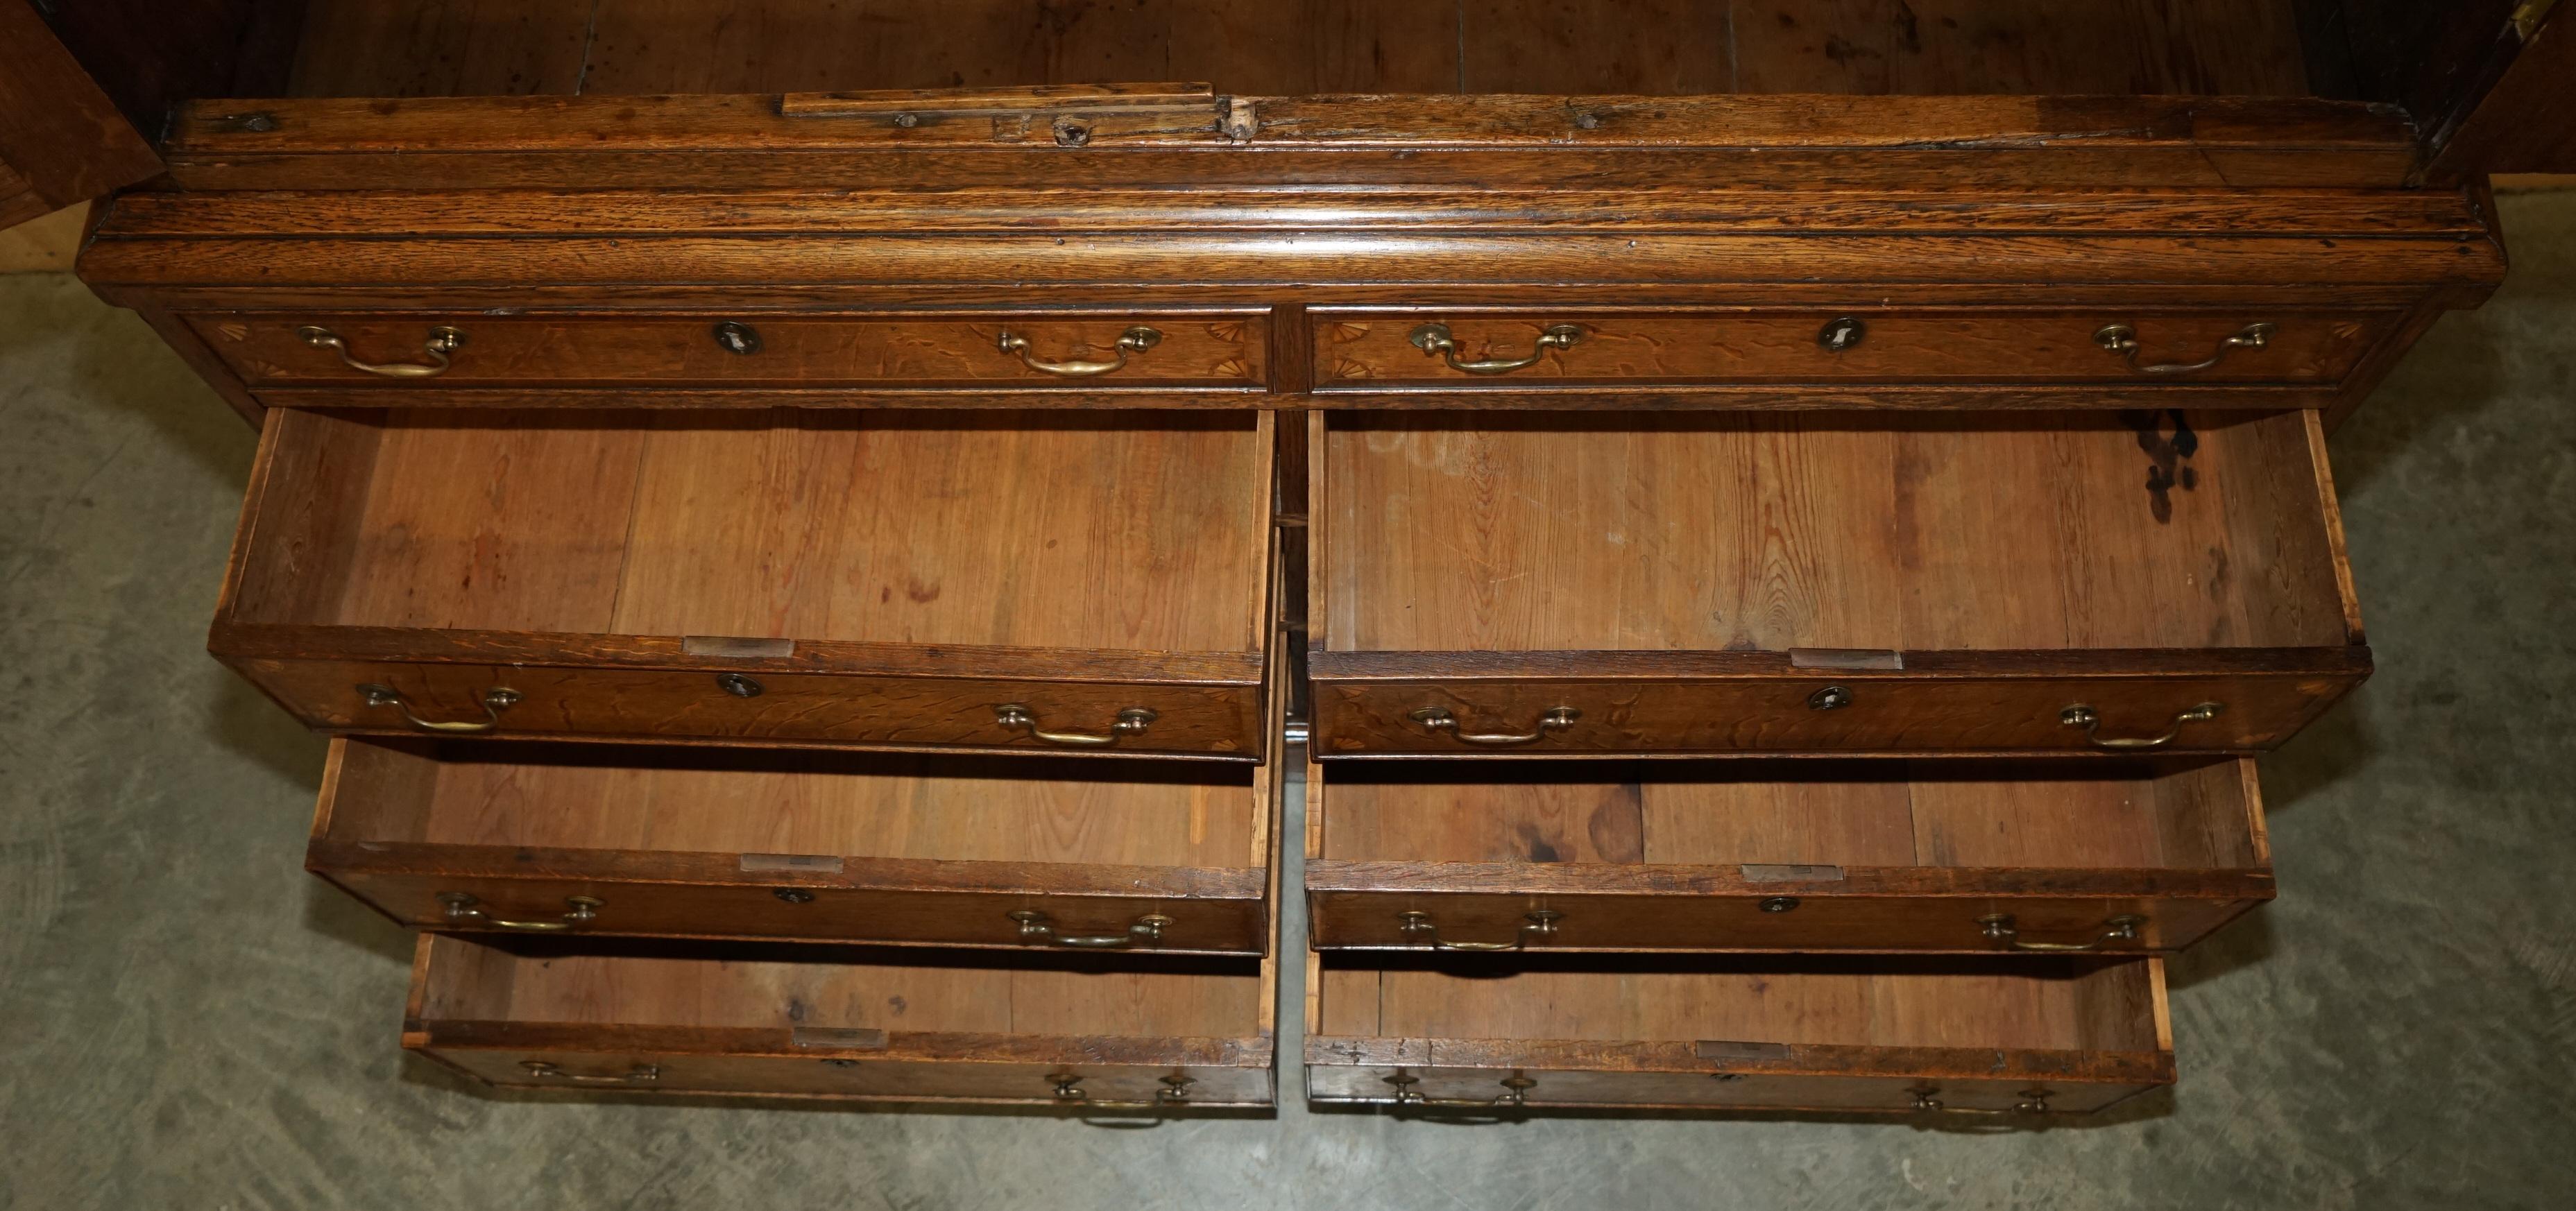 EXQUISITE ANTiQUE 1800 SHERATON INLAID HOUSEKEEPERS CUPBOARD WARDROBE DRAWERS For Sale 11